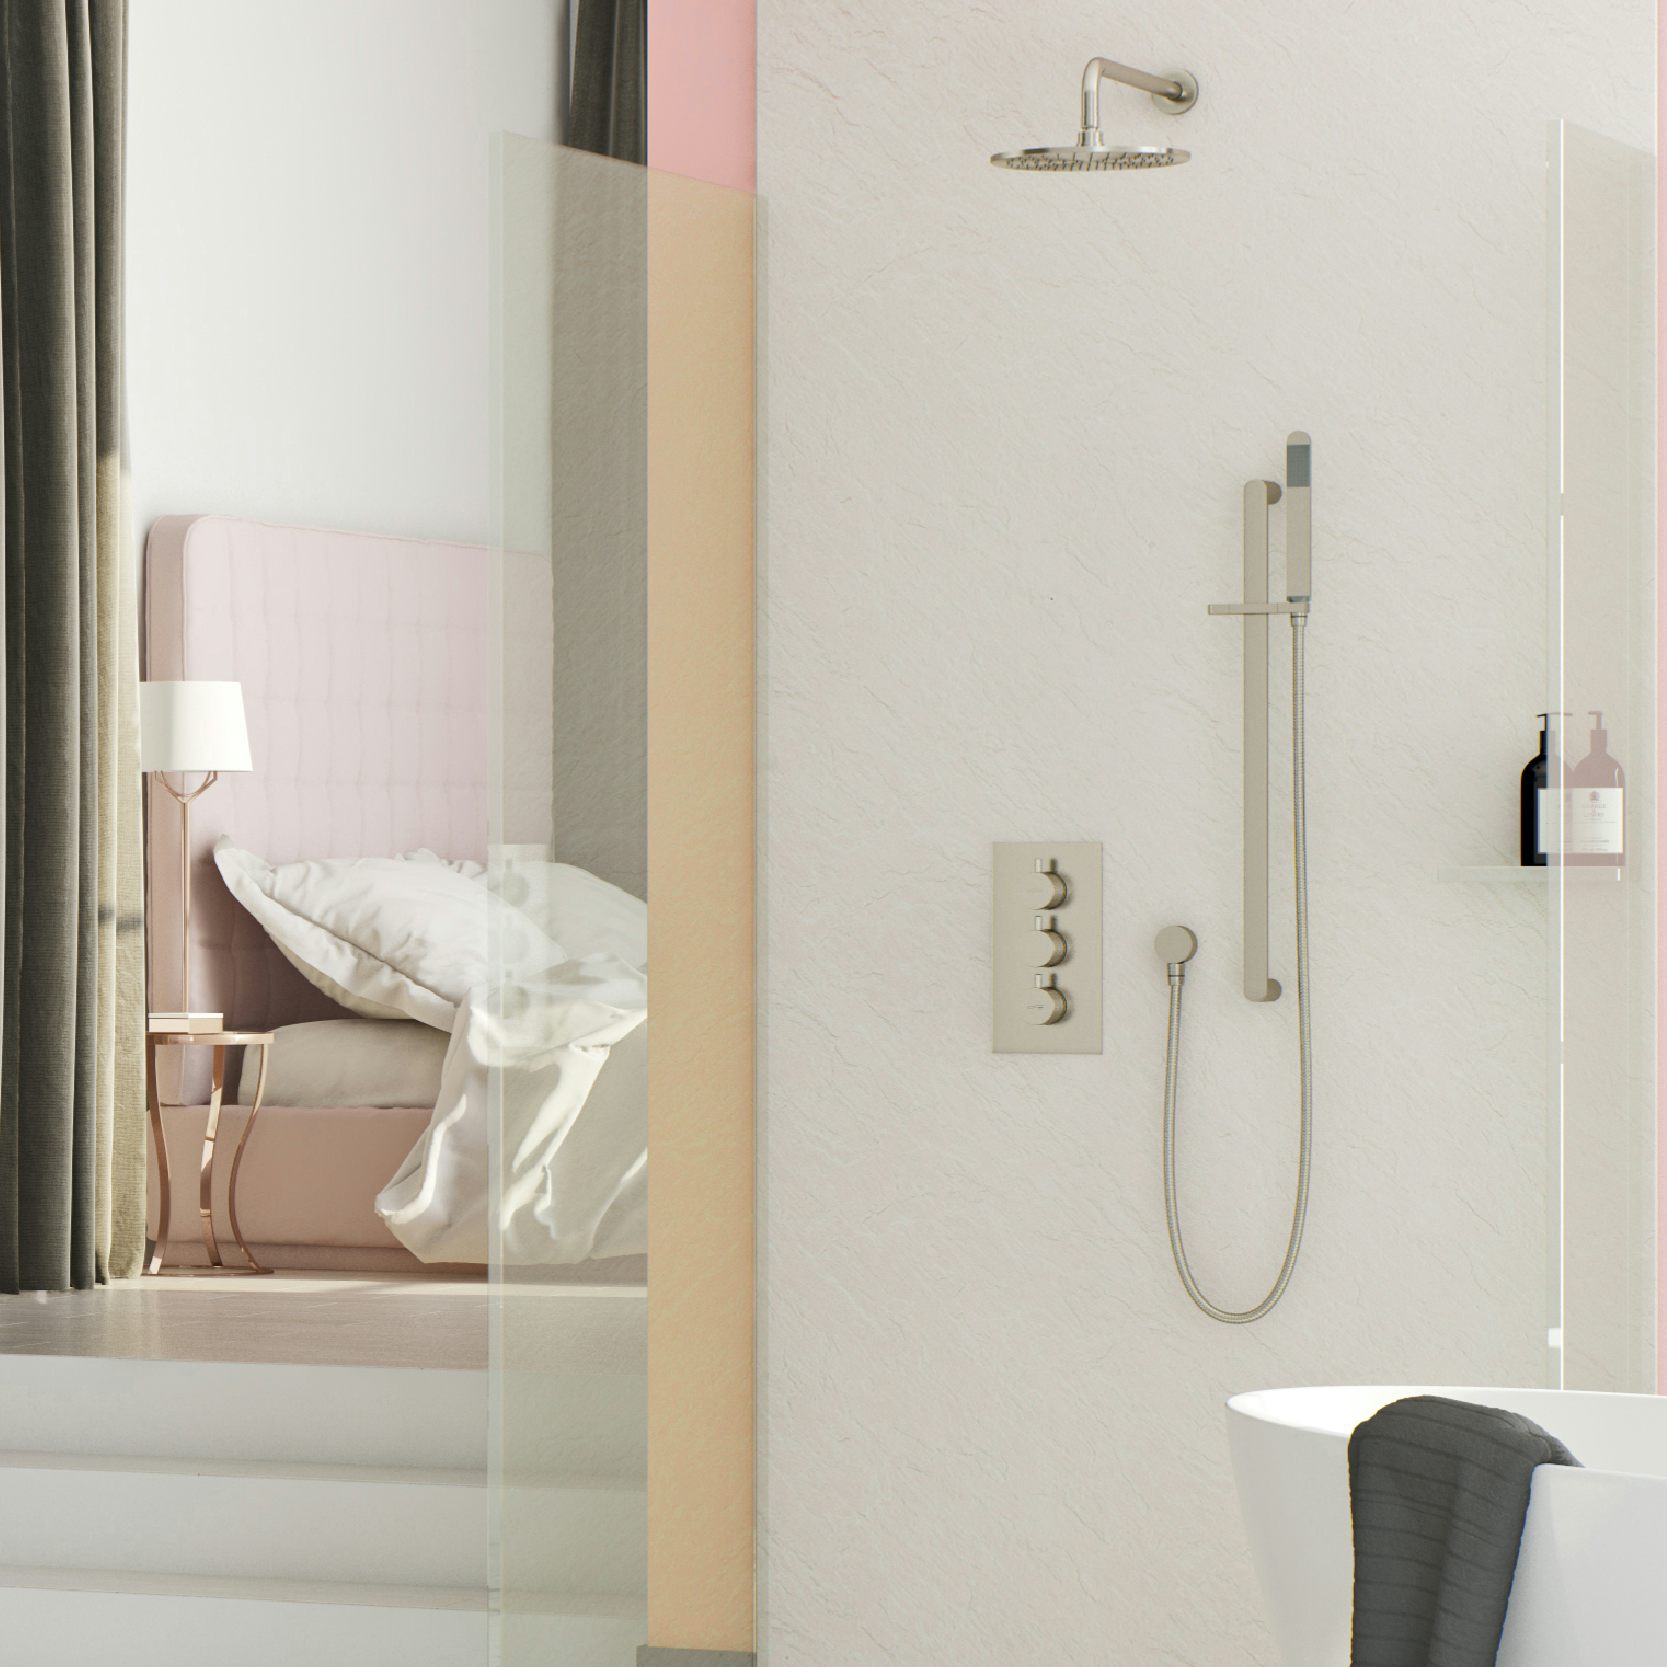 Keep your colour scheme consistent between your ensuite and bathroom